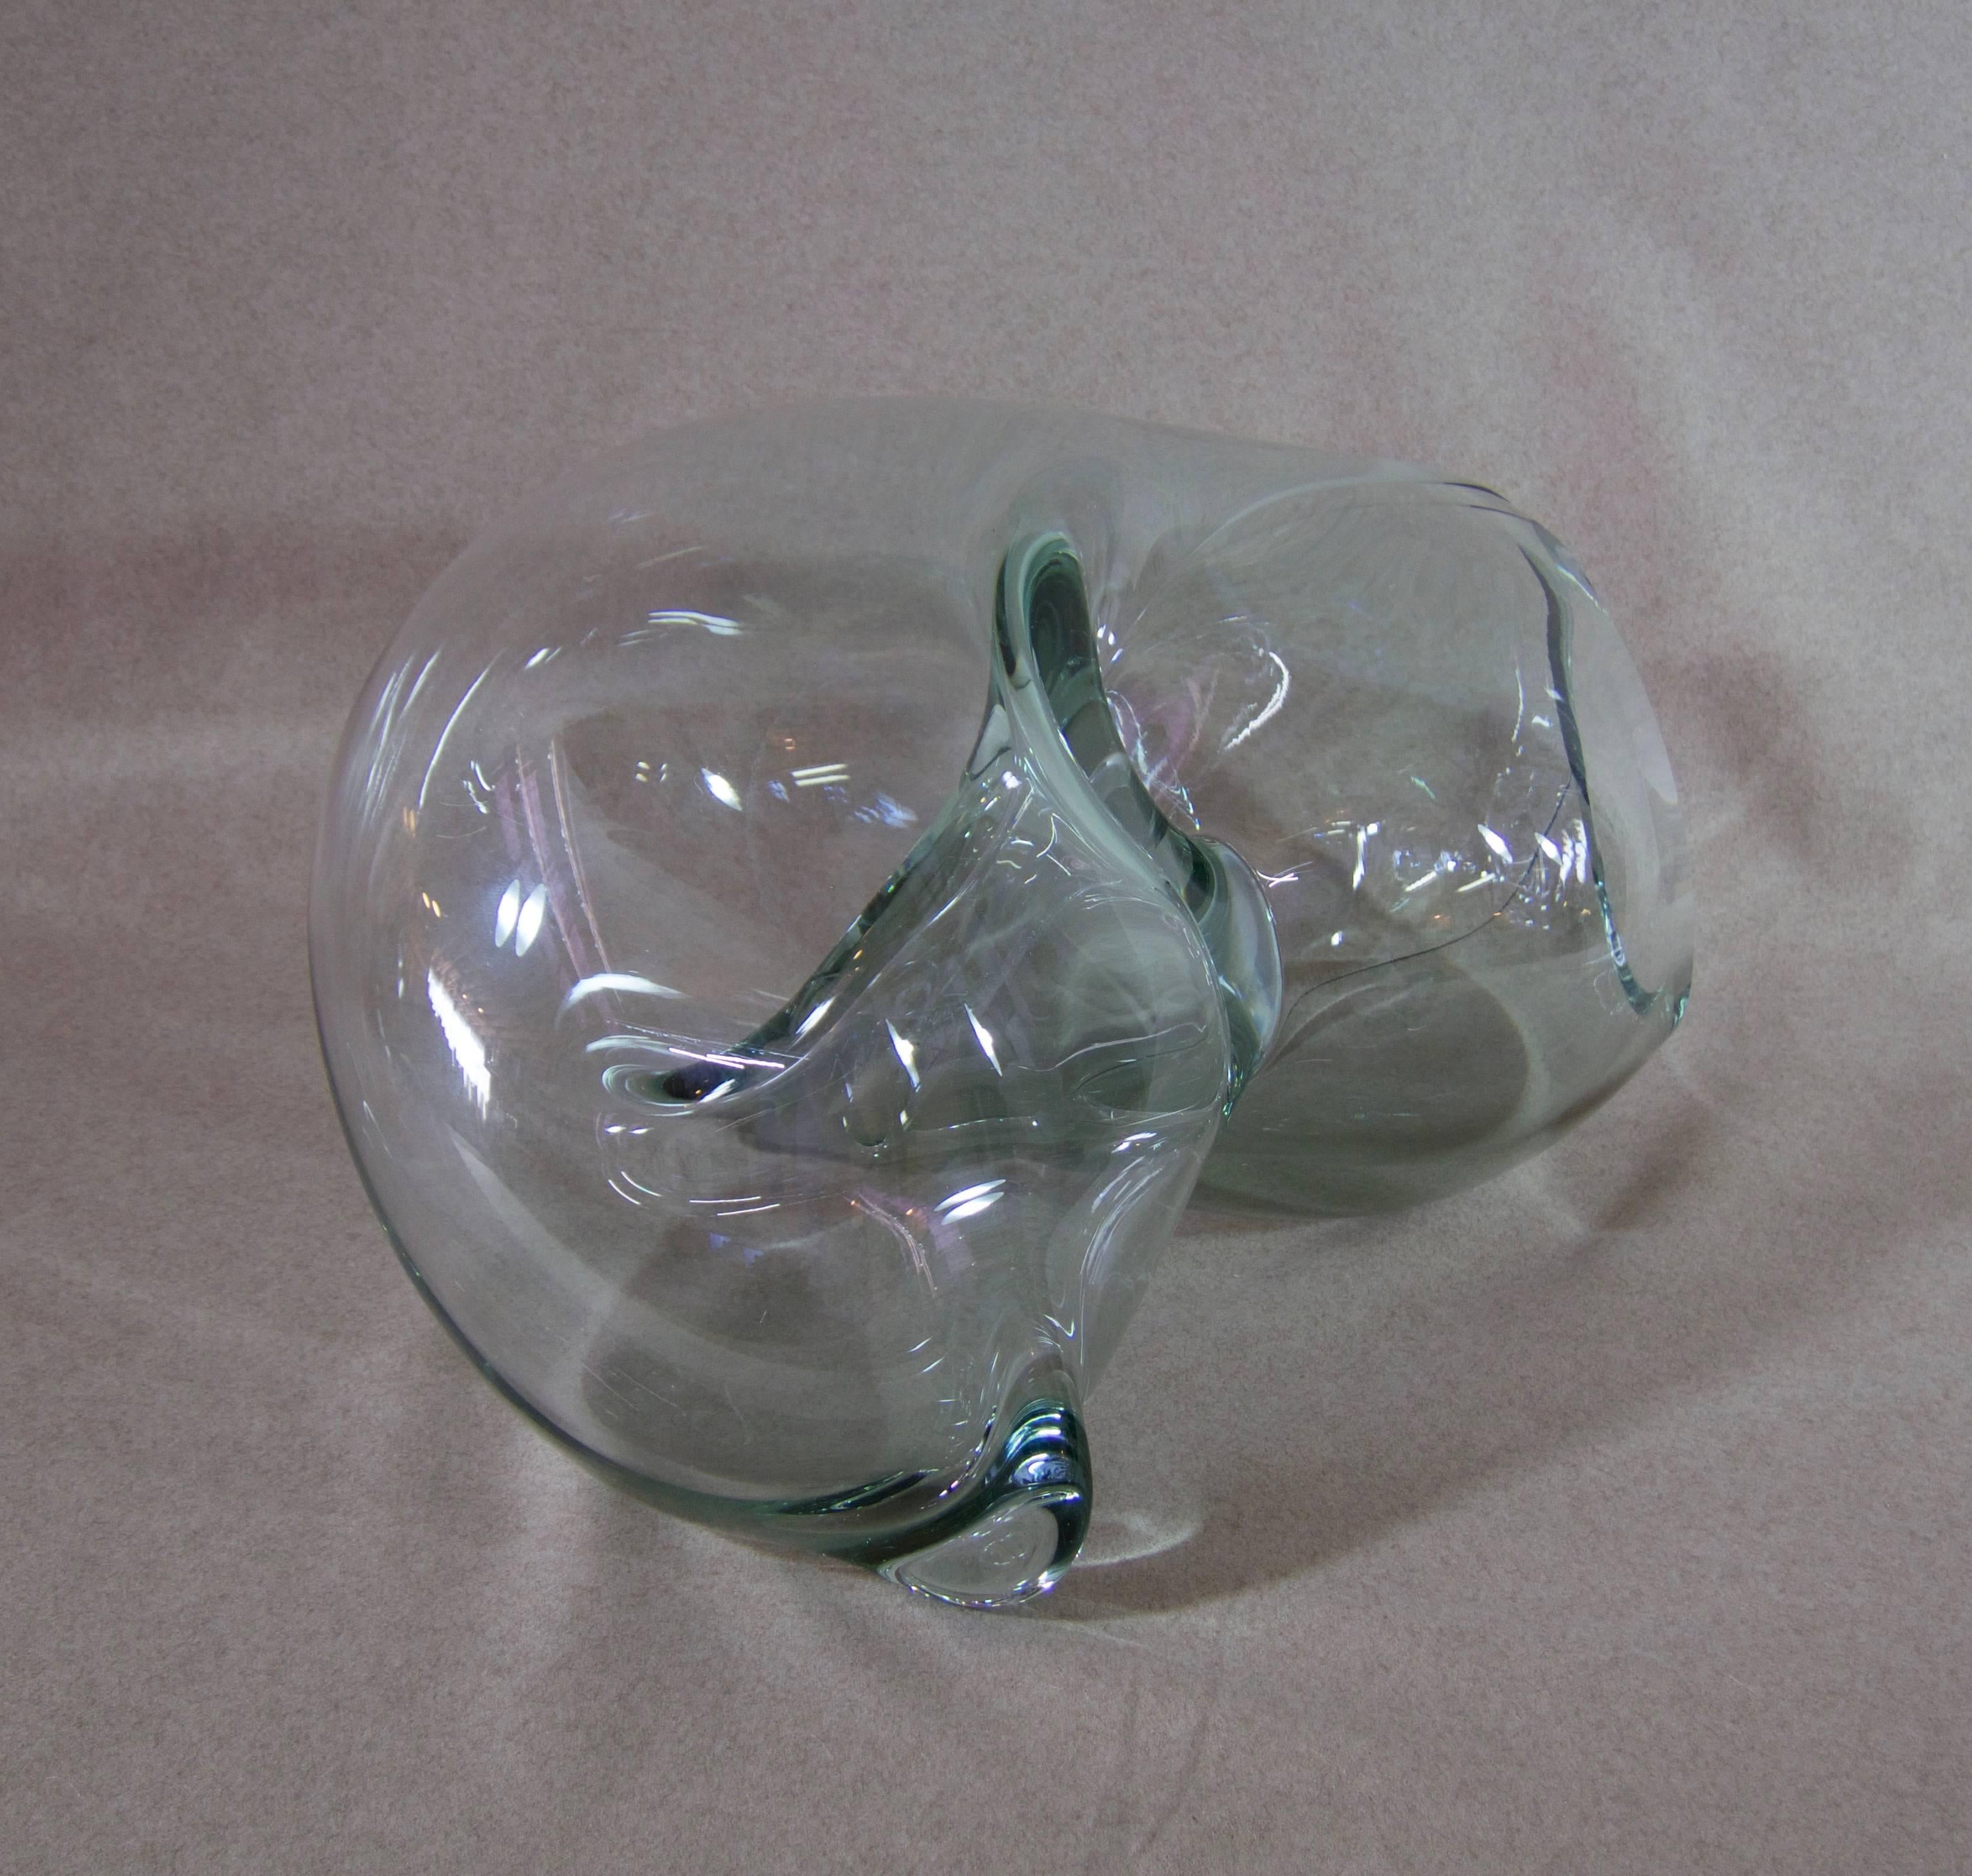 Biomorphic blown and stretched glass sculpture/vessel by American artist John Bingham.
John Bingham, (Santa Fe, NM), is an American studio glass artist.  This work is very typical of the artist's work, and can be displayed as a sculpture, or used a